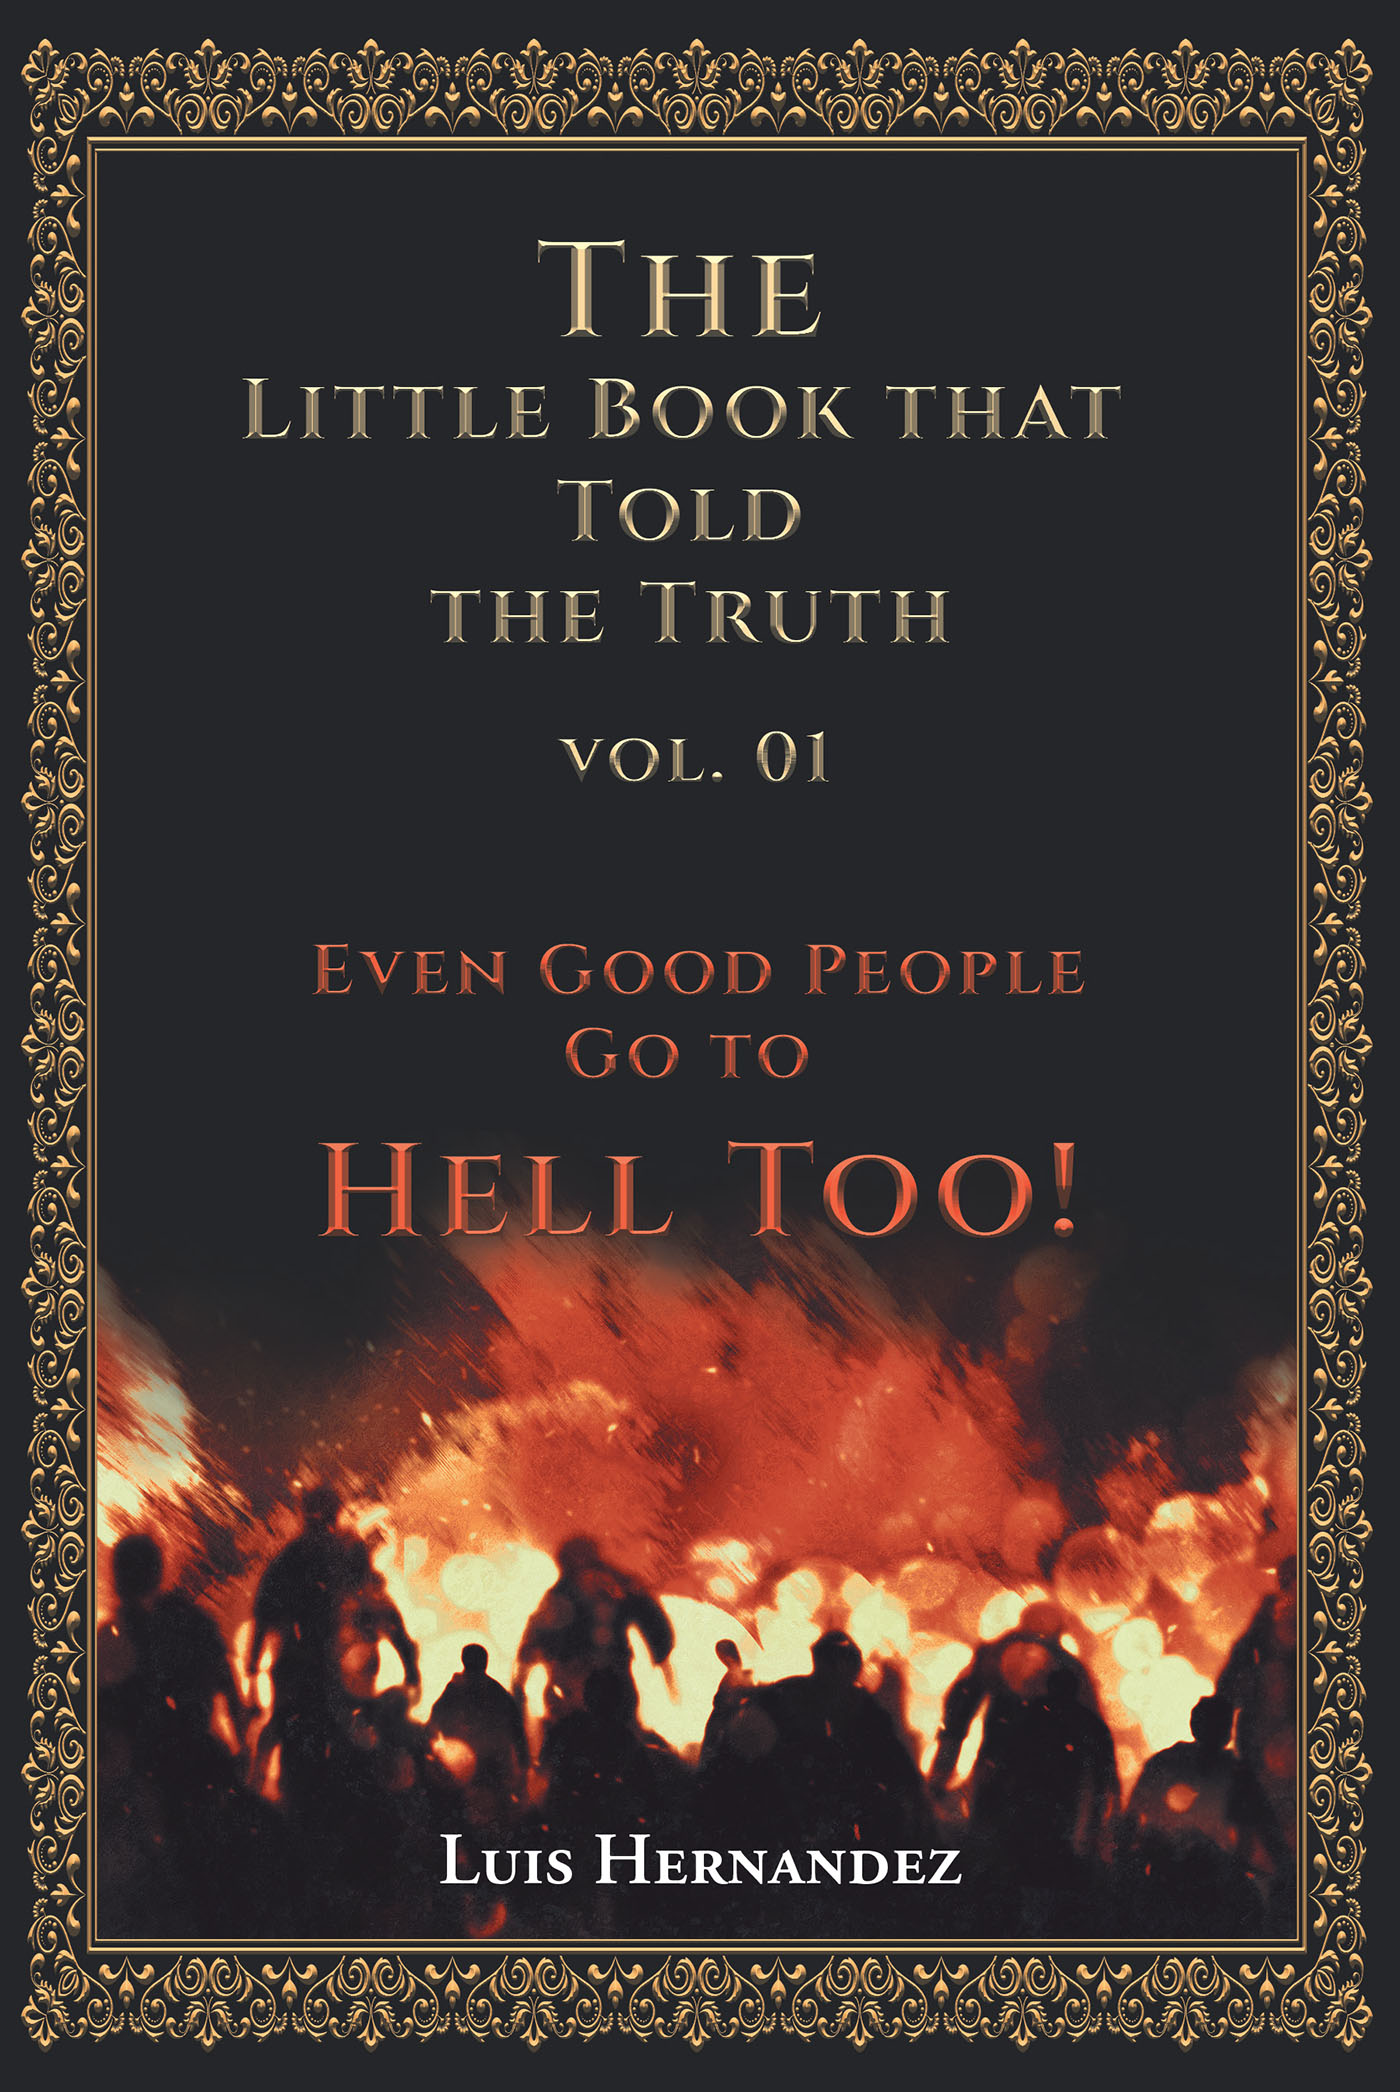 Luis Hernandez’s Newly Released “The Little Book that Told the Truth Vol. 01: Even Good People Go to Hell Too!” is an Inspiring Resource for Anyone Seeking God’s Truth